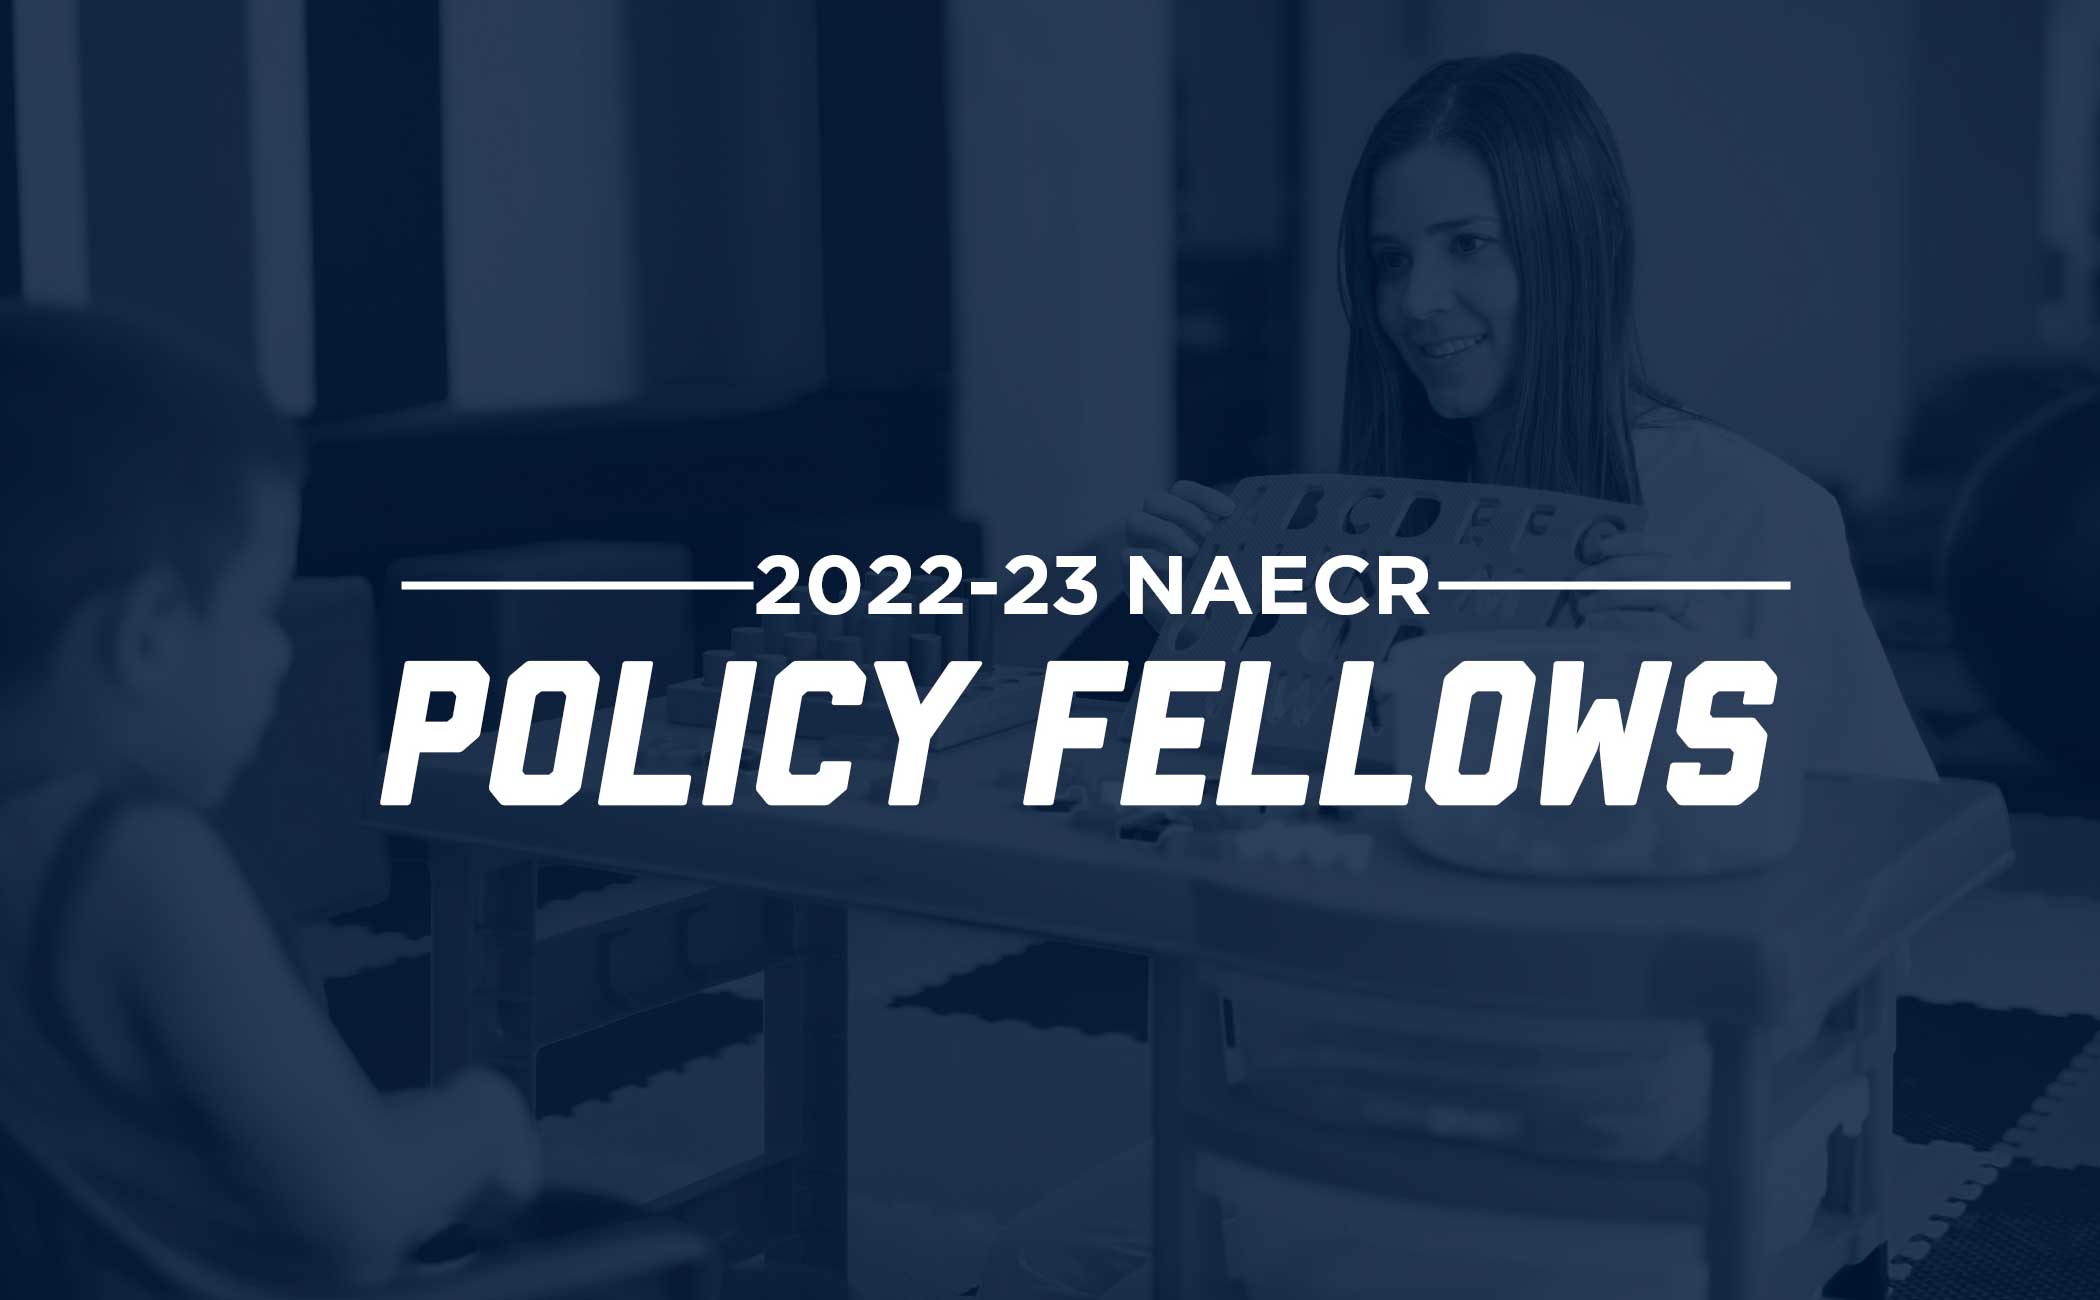 NAECR Policy Fellows graphic